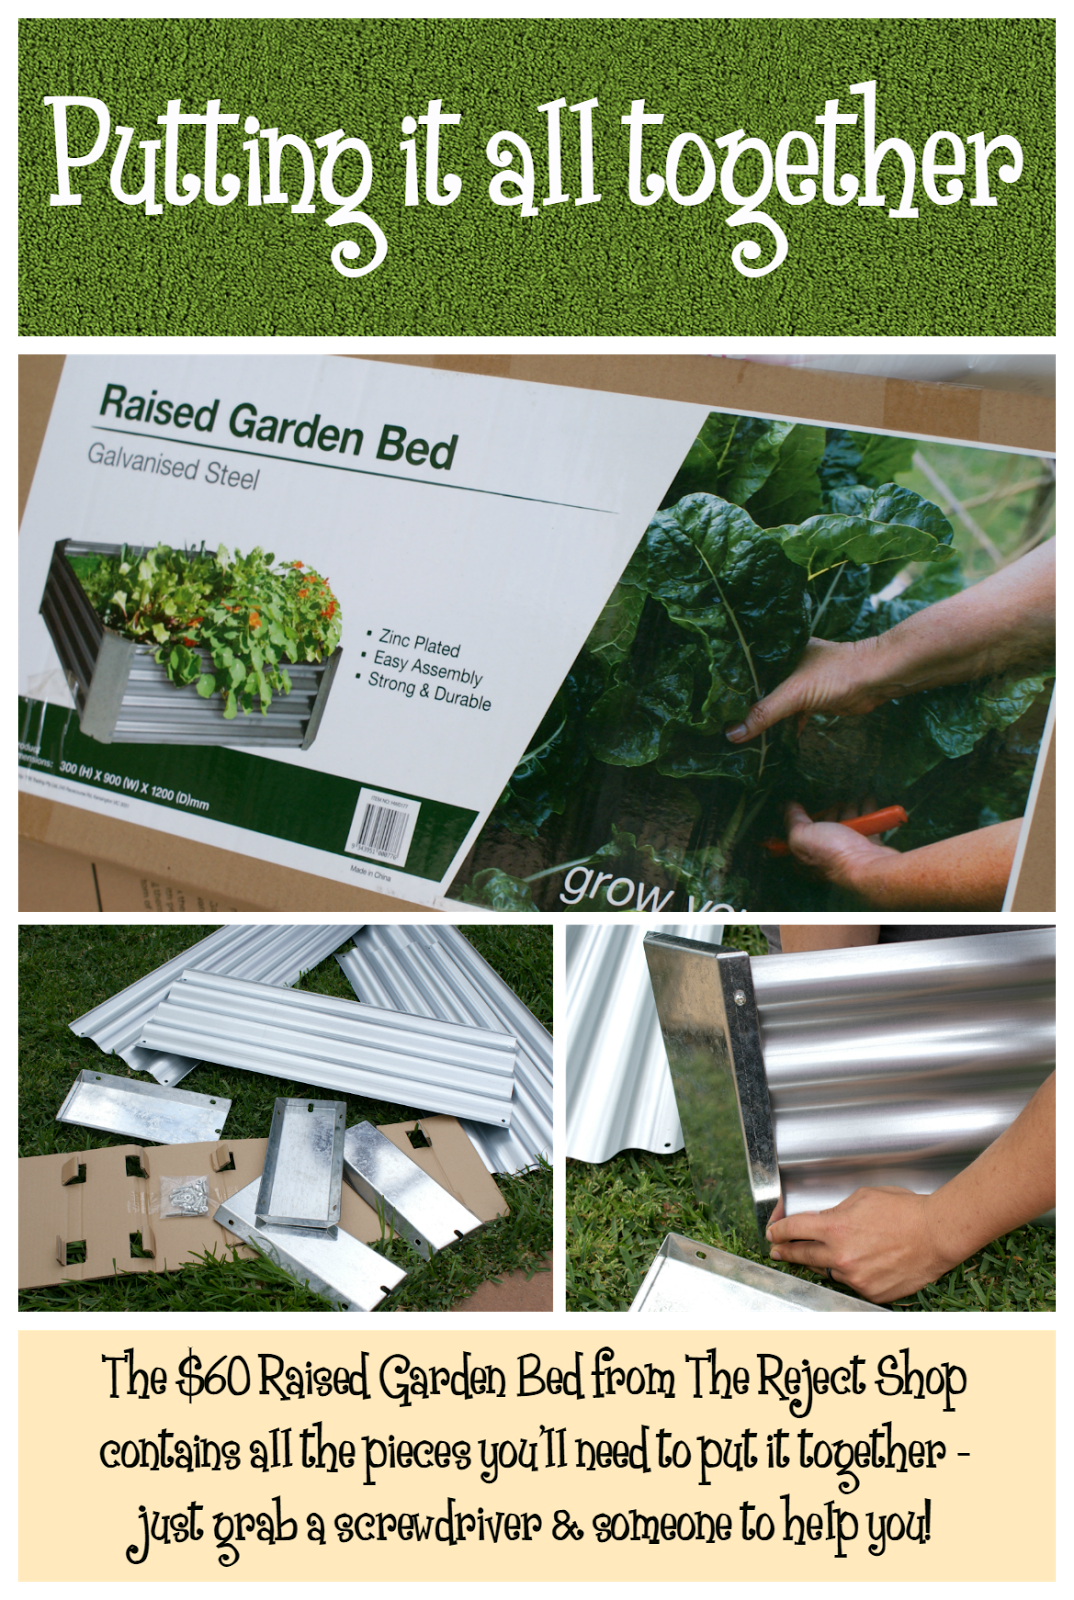 How to Make Your Own Raised Veggie Patch and Grow Your Own Vegetables from Seed - Reject Shop Raised Garden Bed